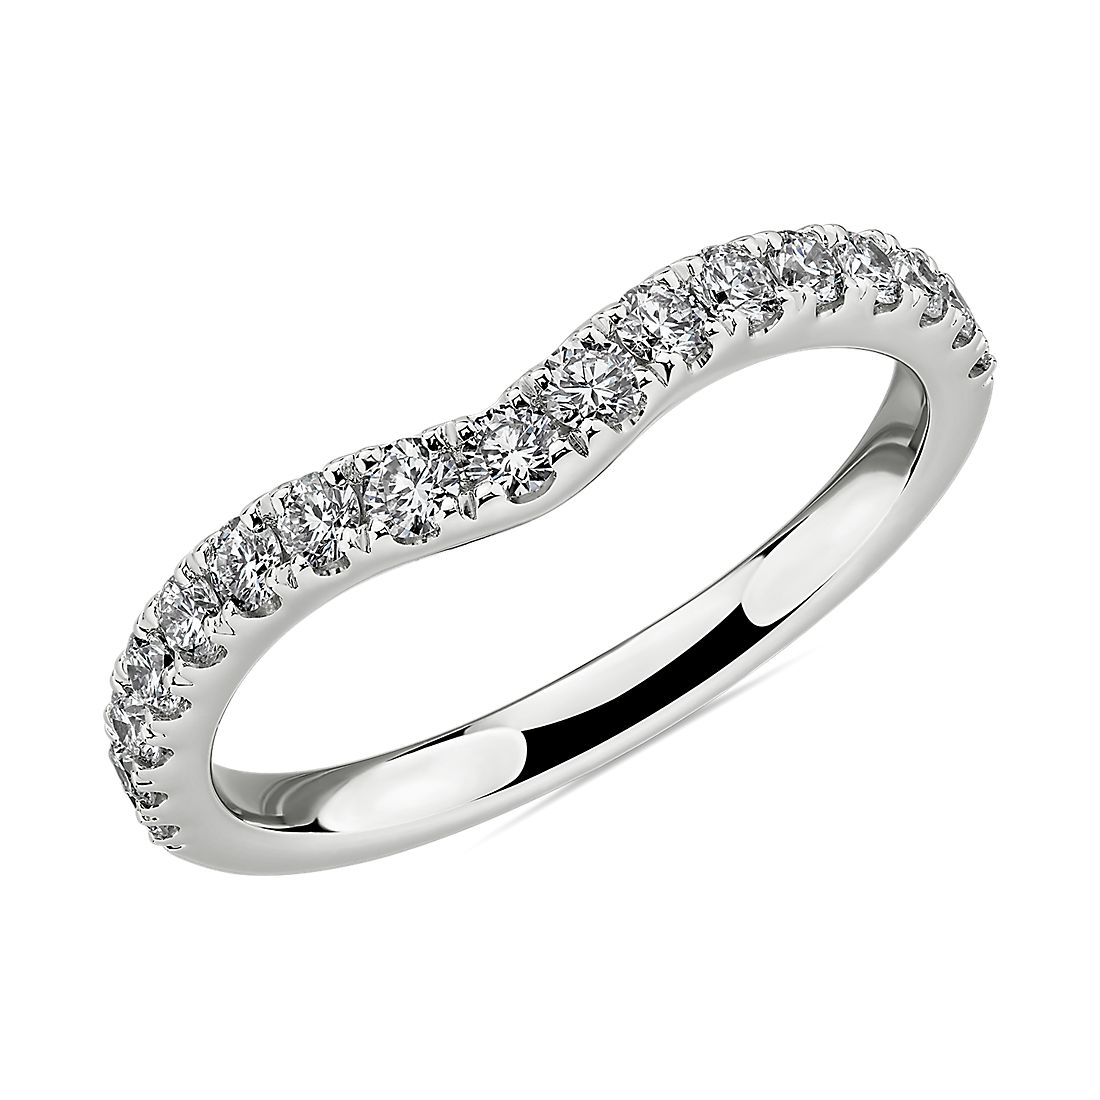 Curved Diamond Wedding Ring in 14k White Gold (1/2 ct. tw